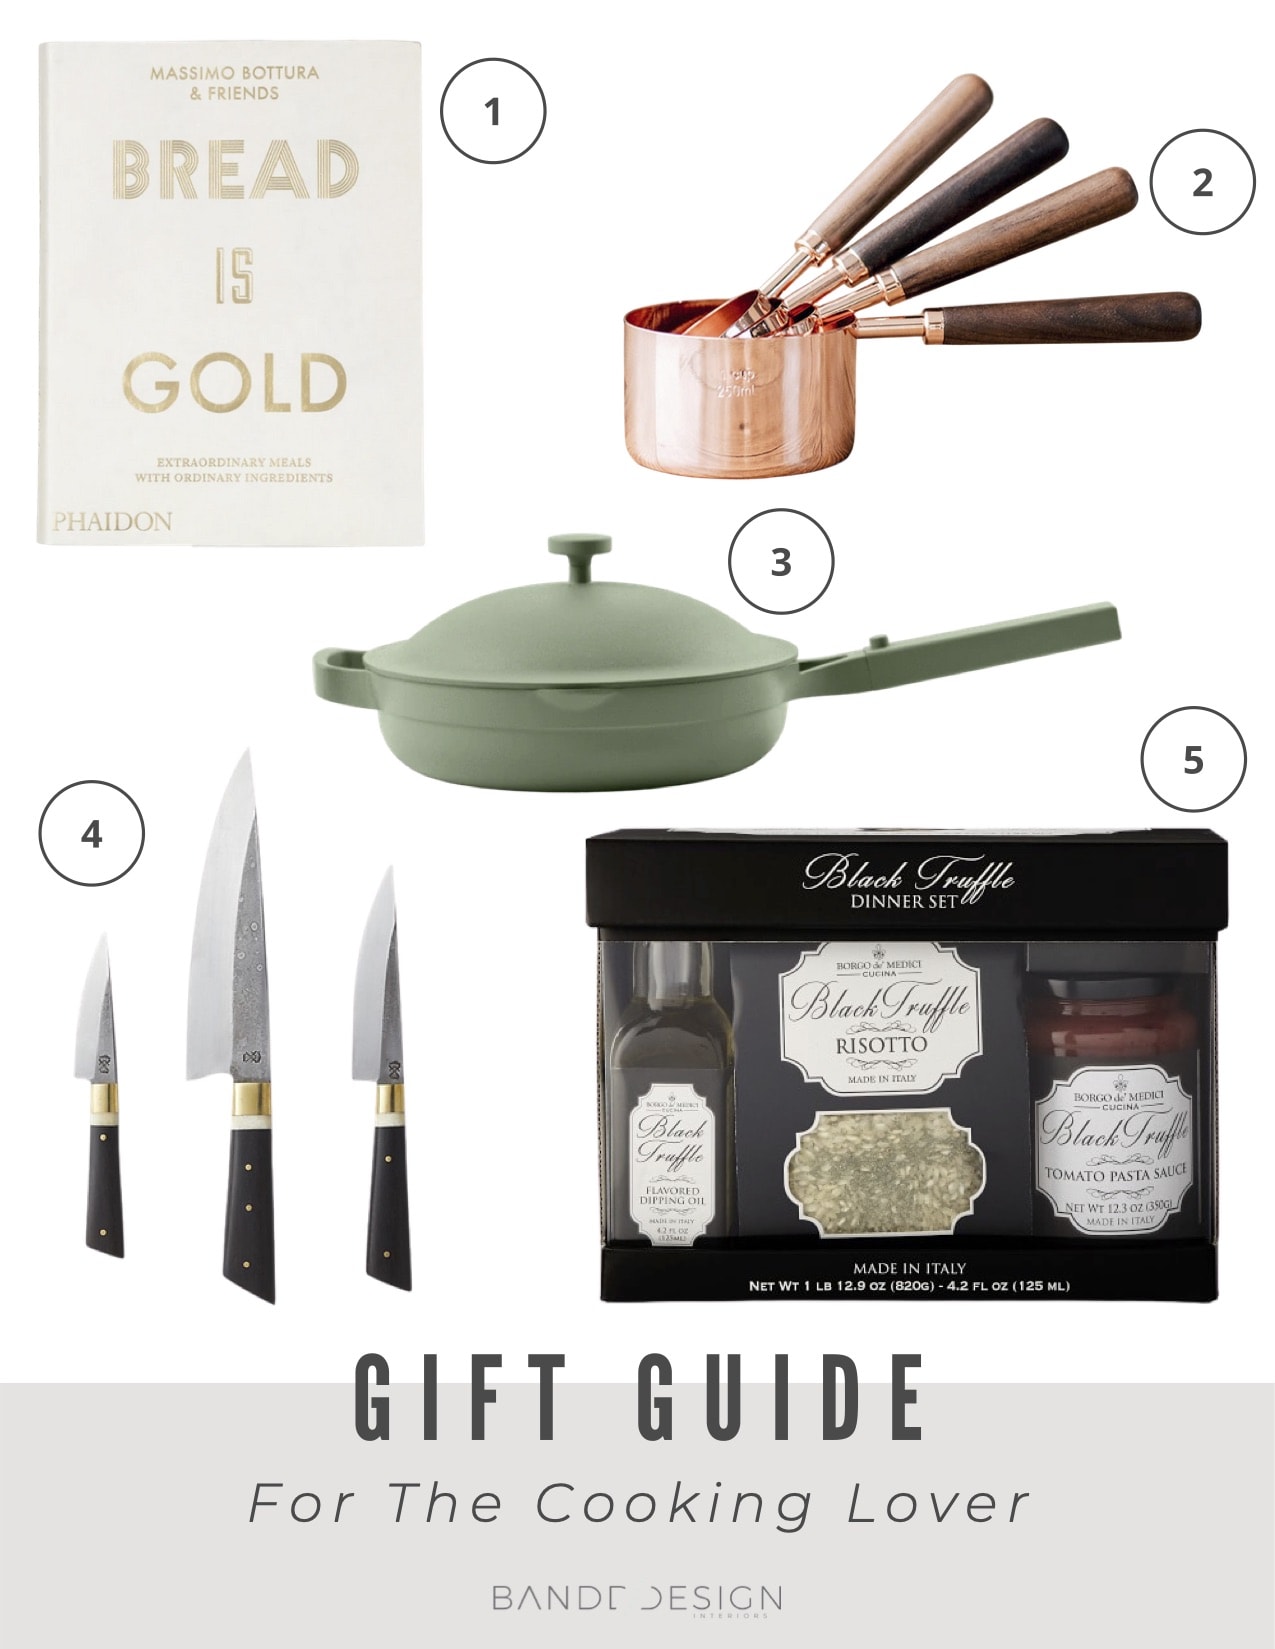 Gifts For Cooking Lover Bandd Design